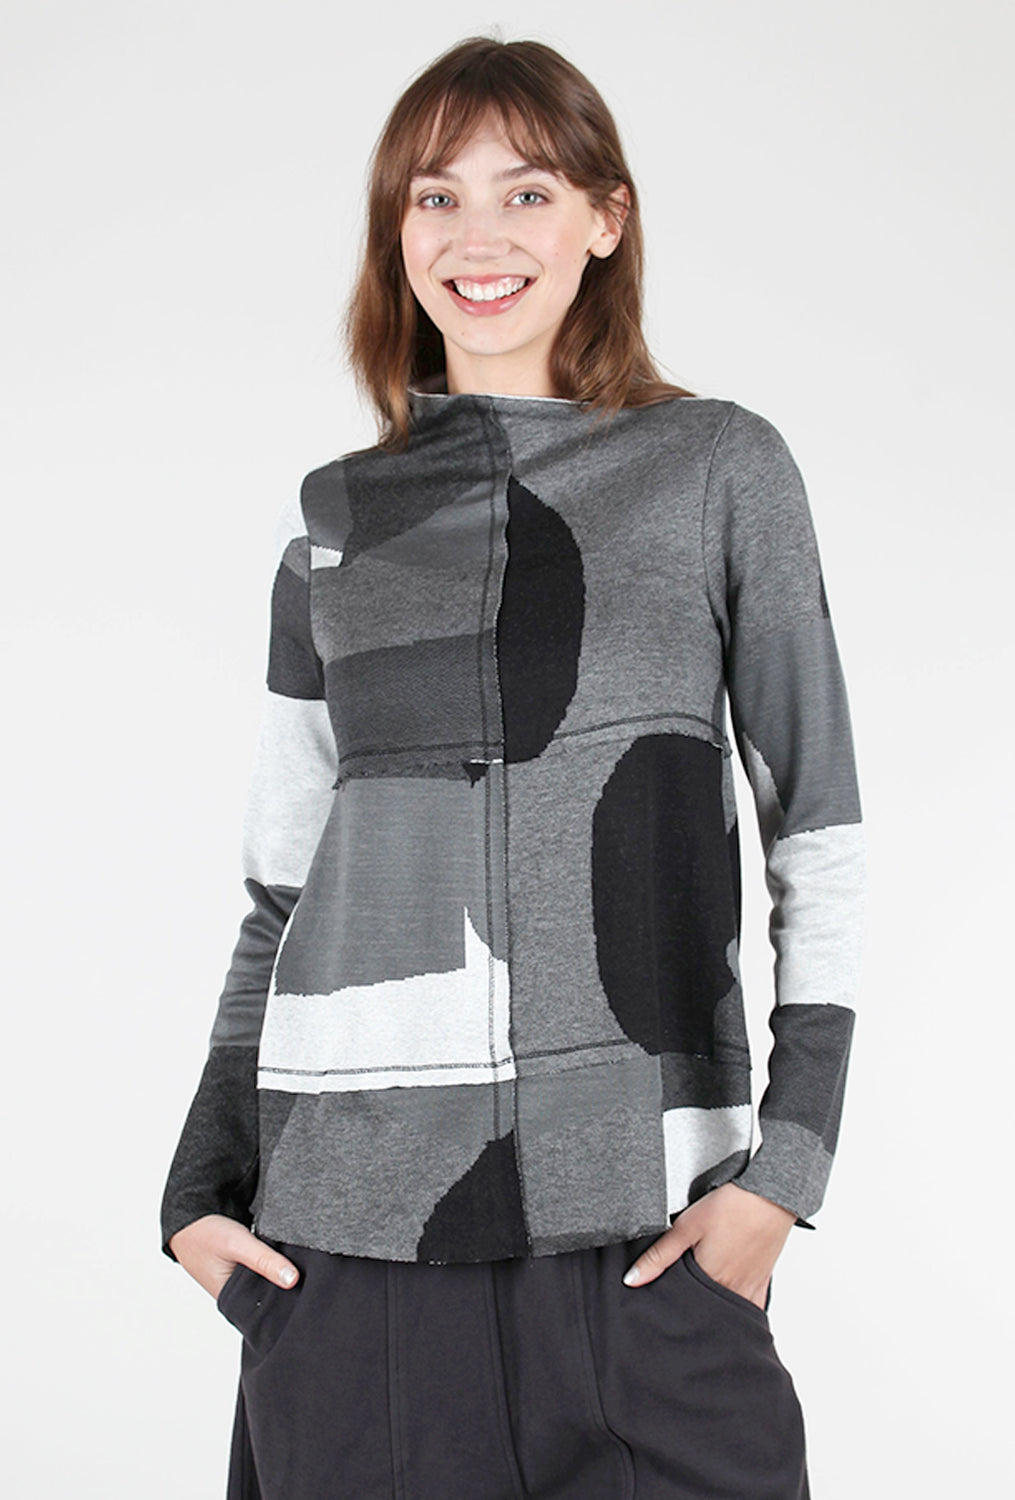 Ozai Clouds Blocked Knit Top, Grays 